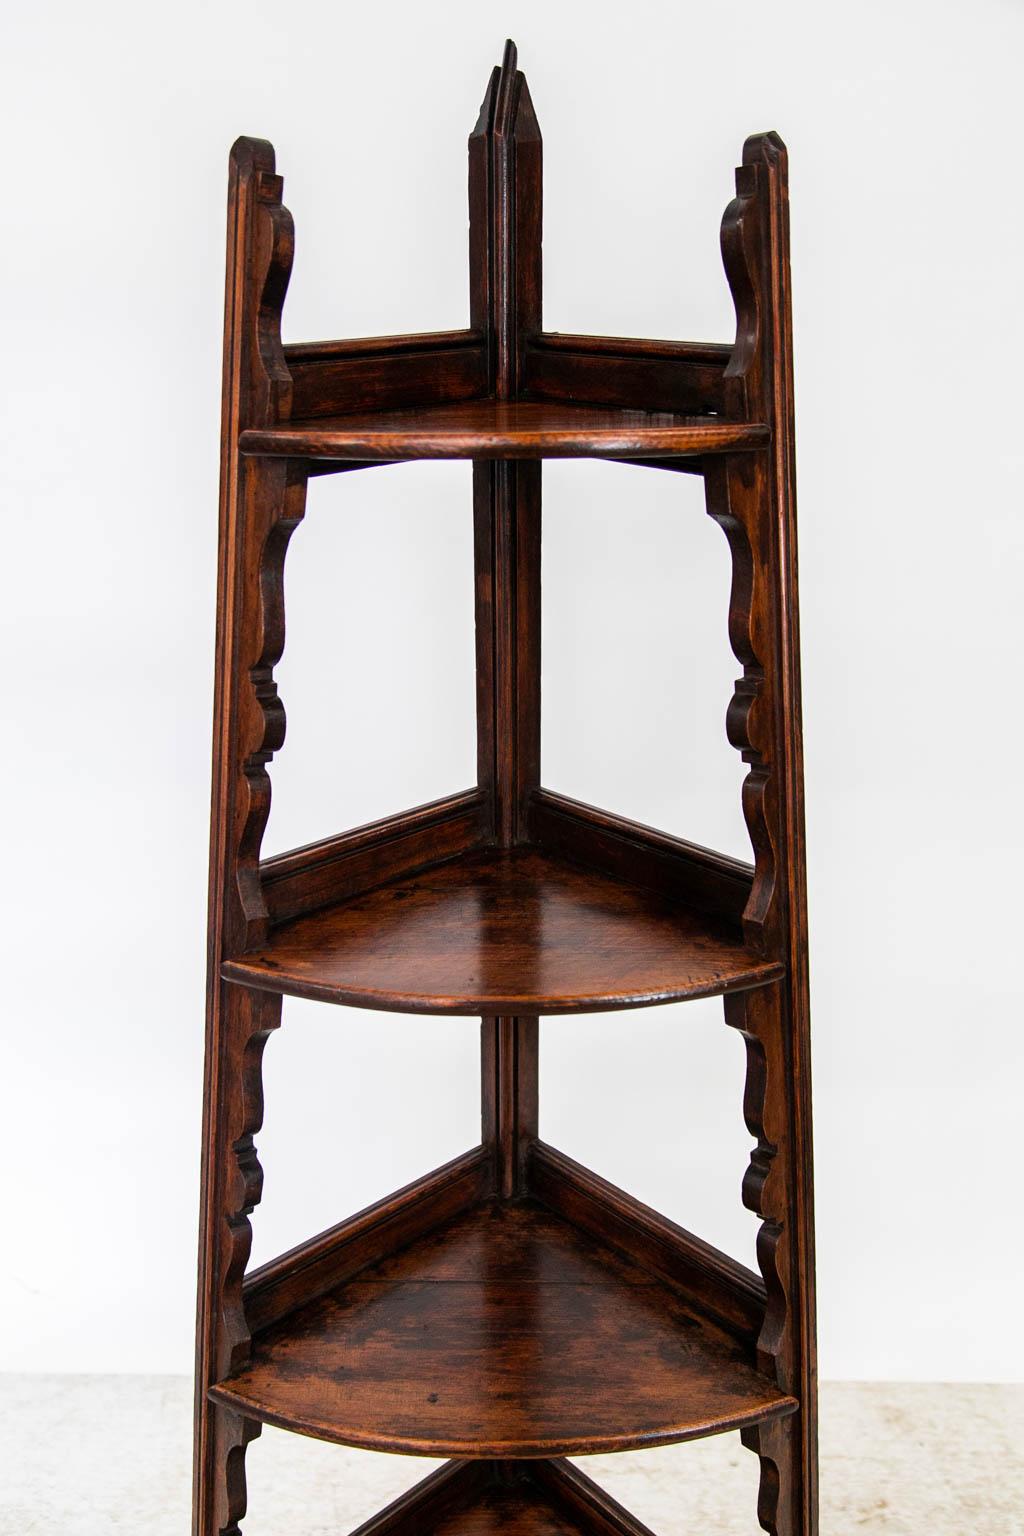 The shelves of this stand each have a shaped rear gallery and are graduated top to bottom from small to large. The side legs have applied shaped shelf supports that continue to the toes of the shelf.